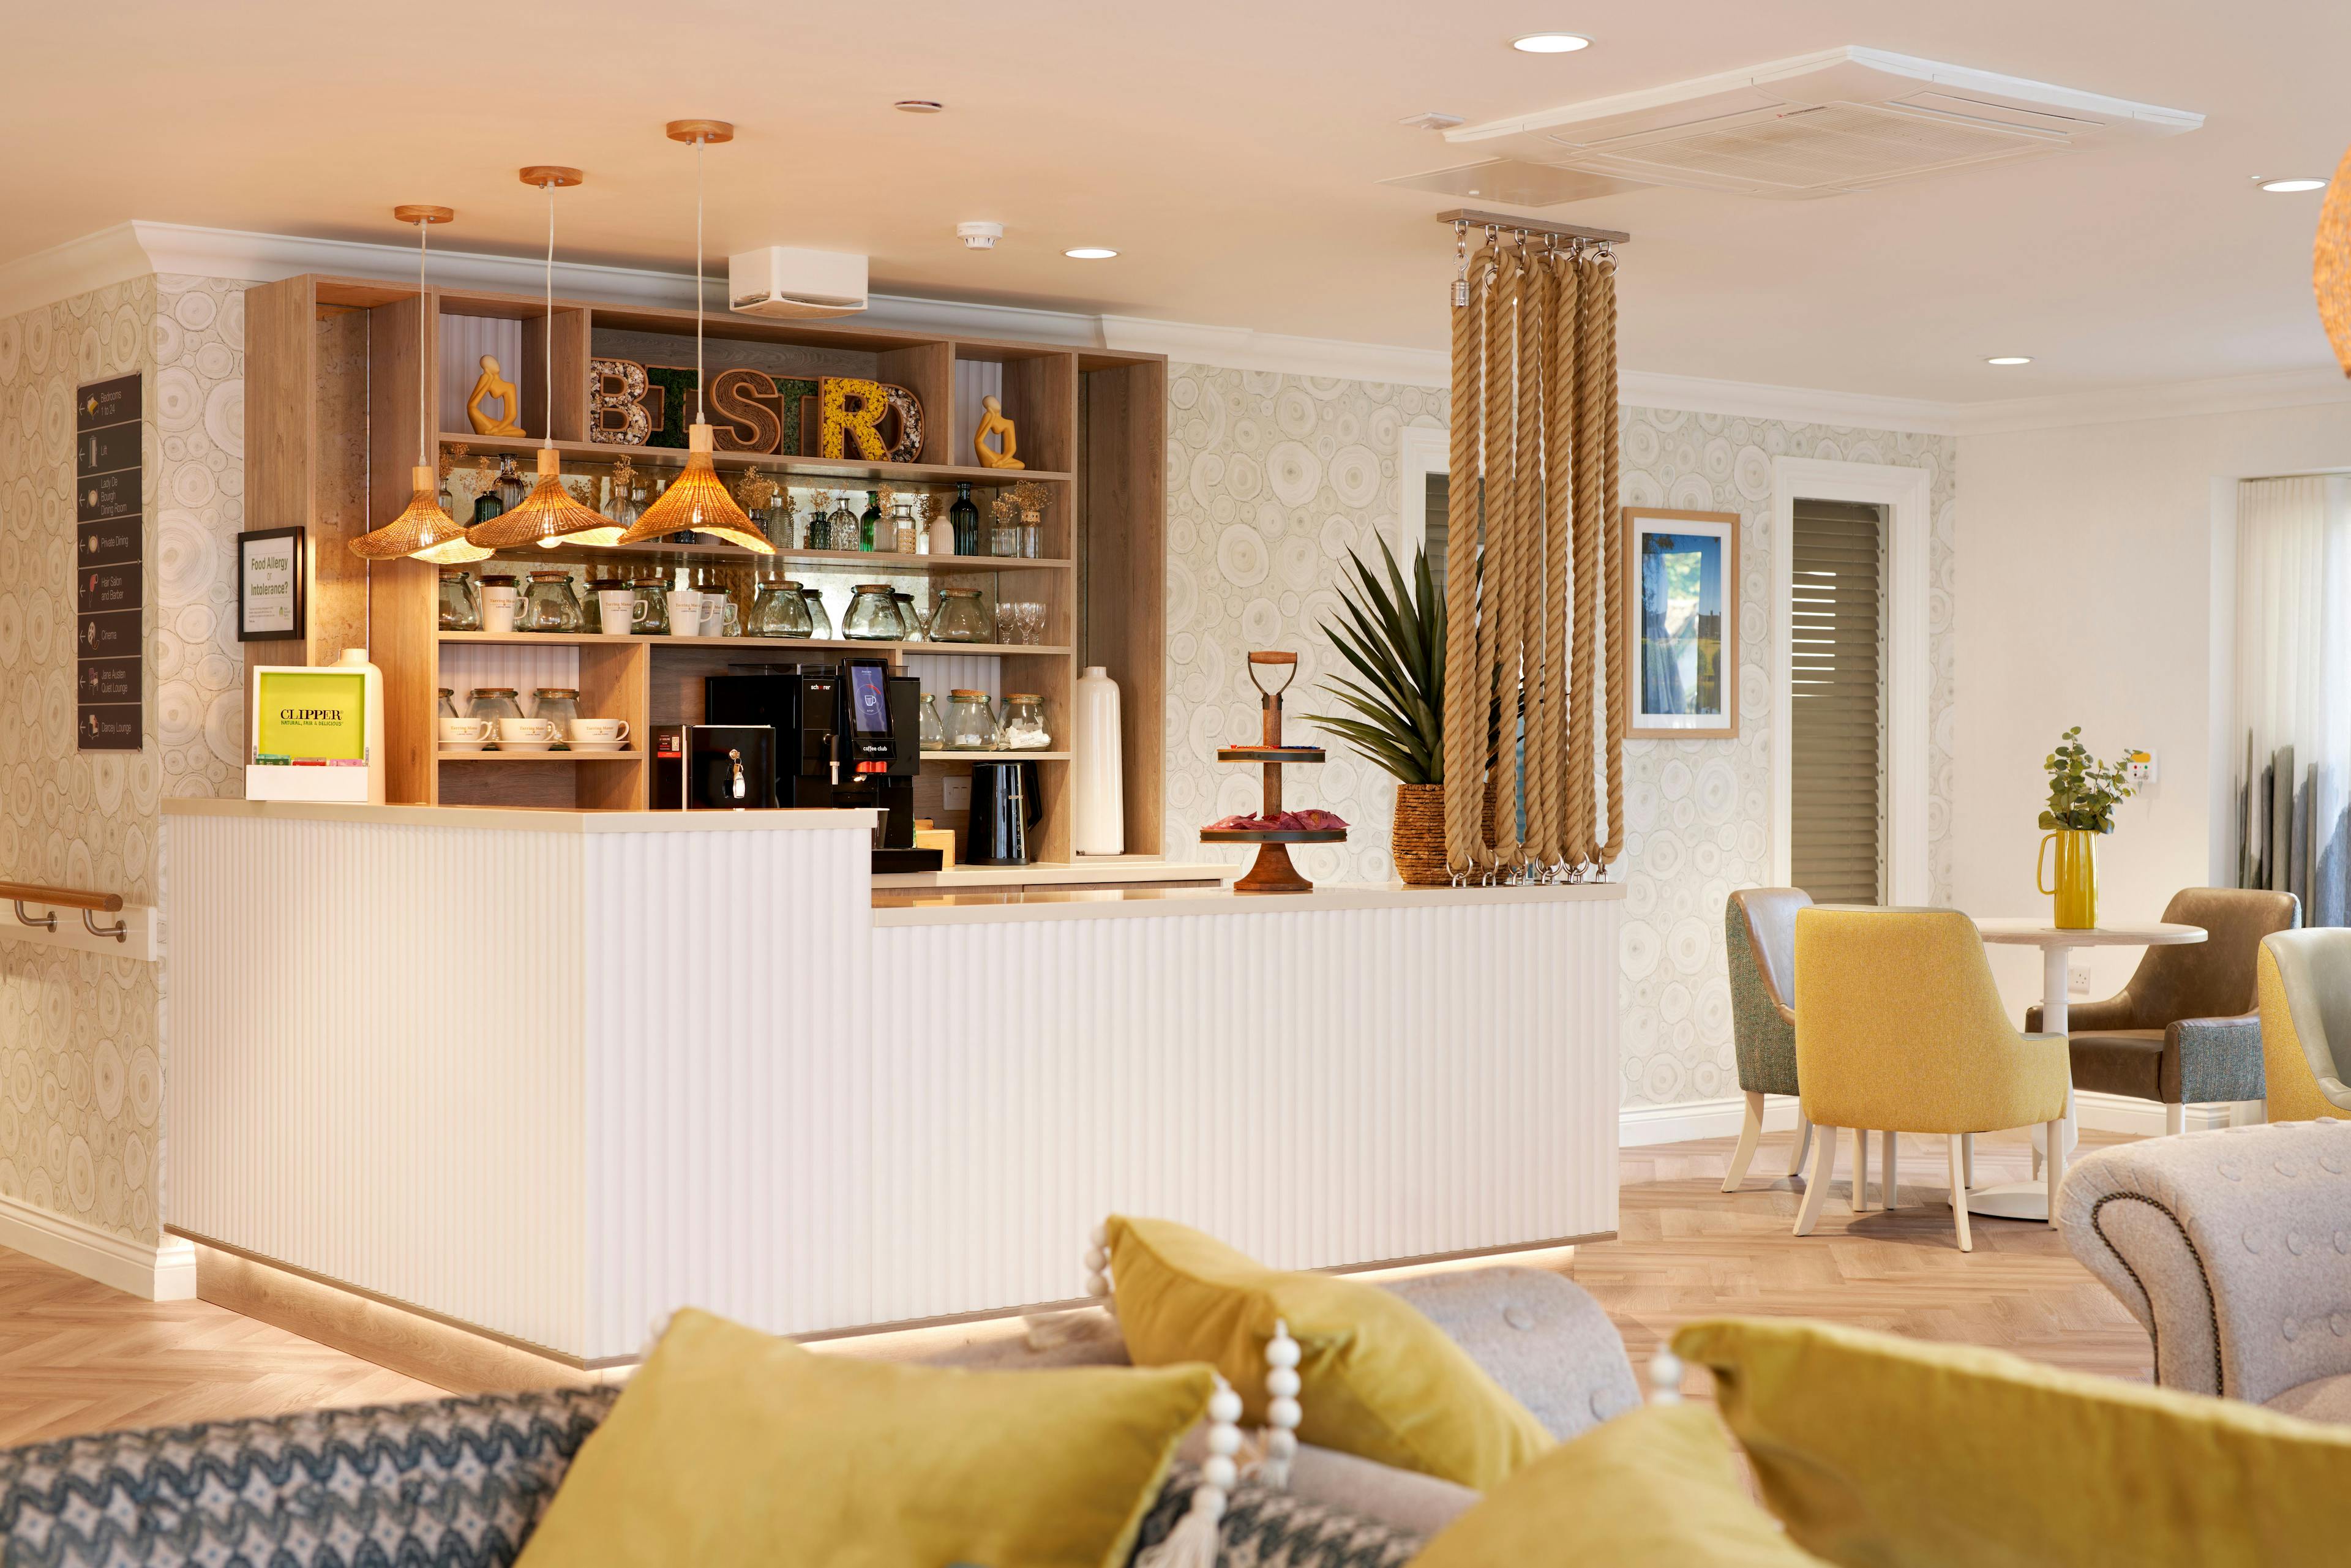 Bar at Tarring Manor in Worthing, West Sussex